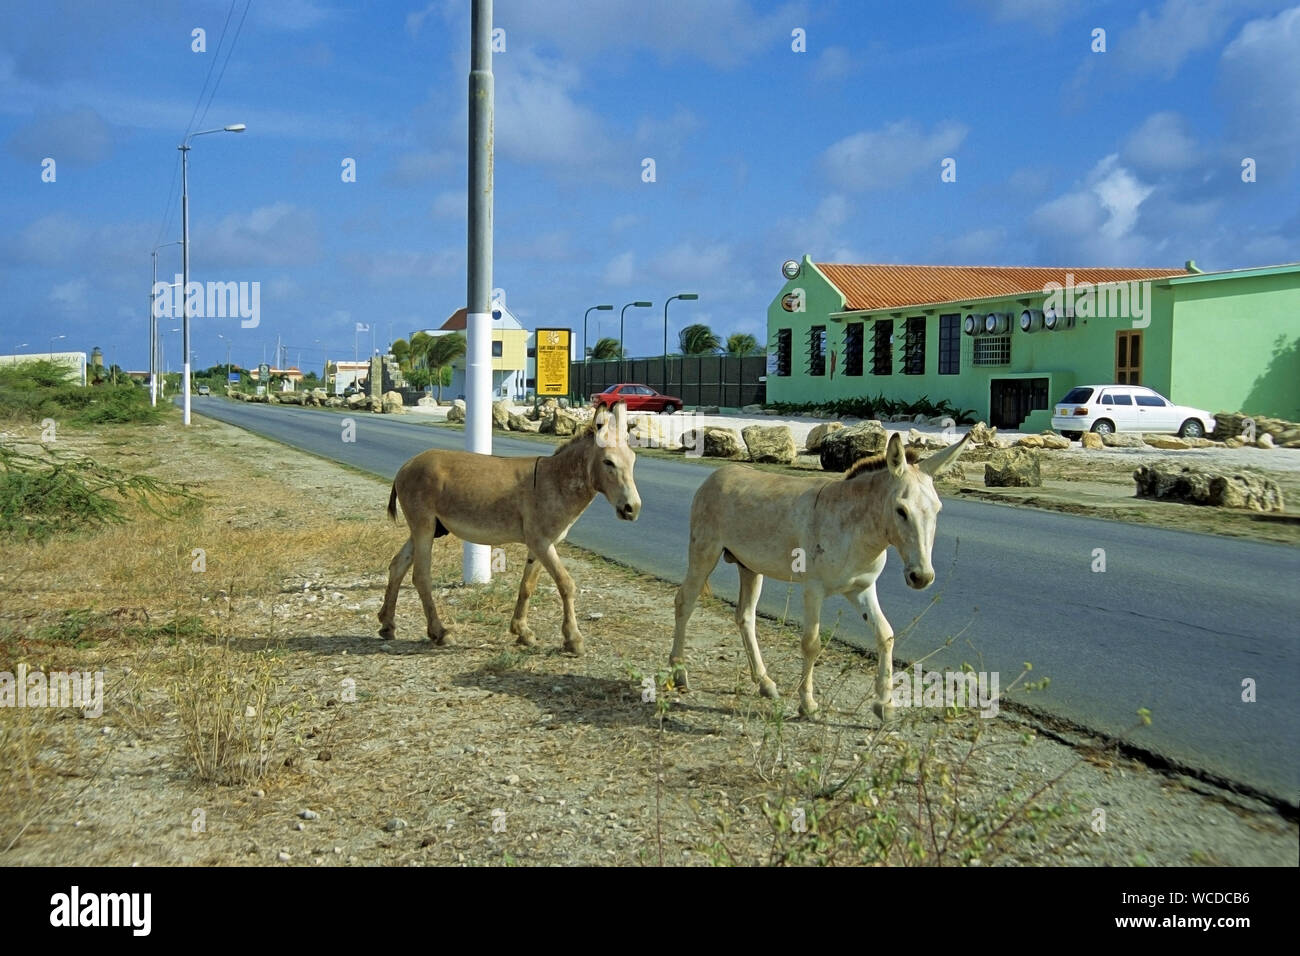 Wild donkey, everywhere to find on Bonaire, some places have even warning signs at the road, Bonaire, Netherland Antilles Stock Photo